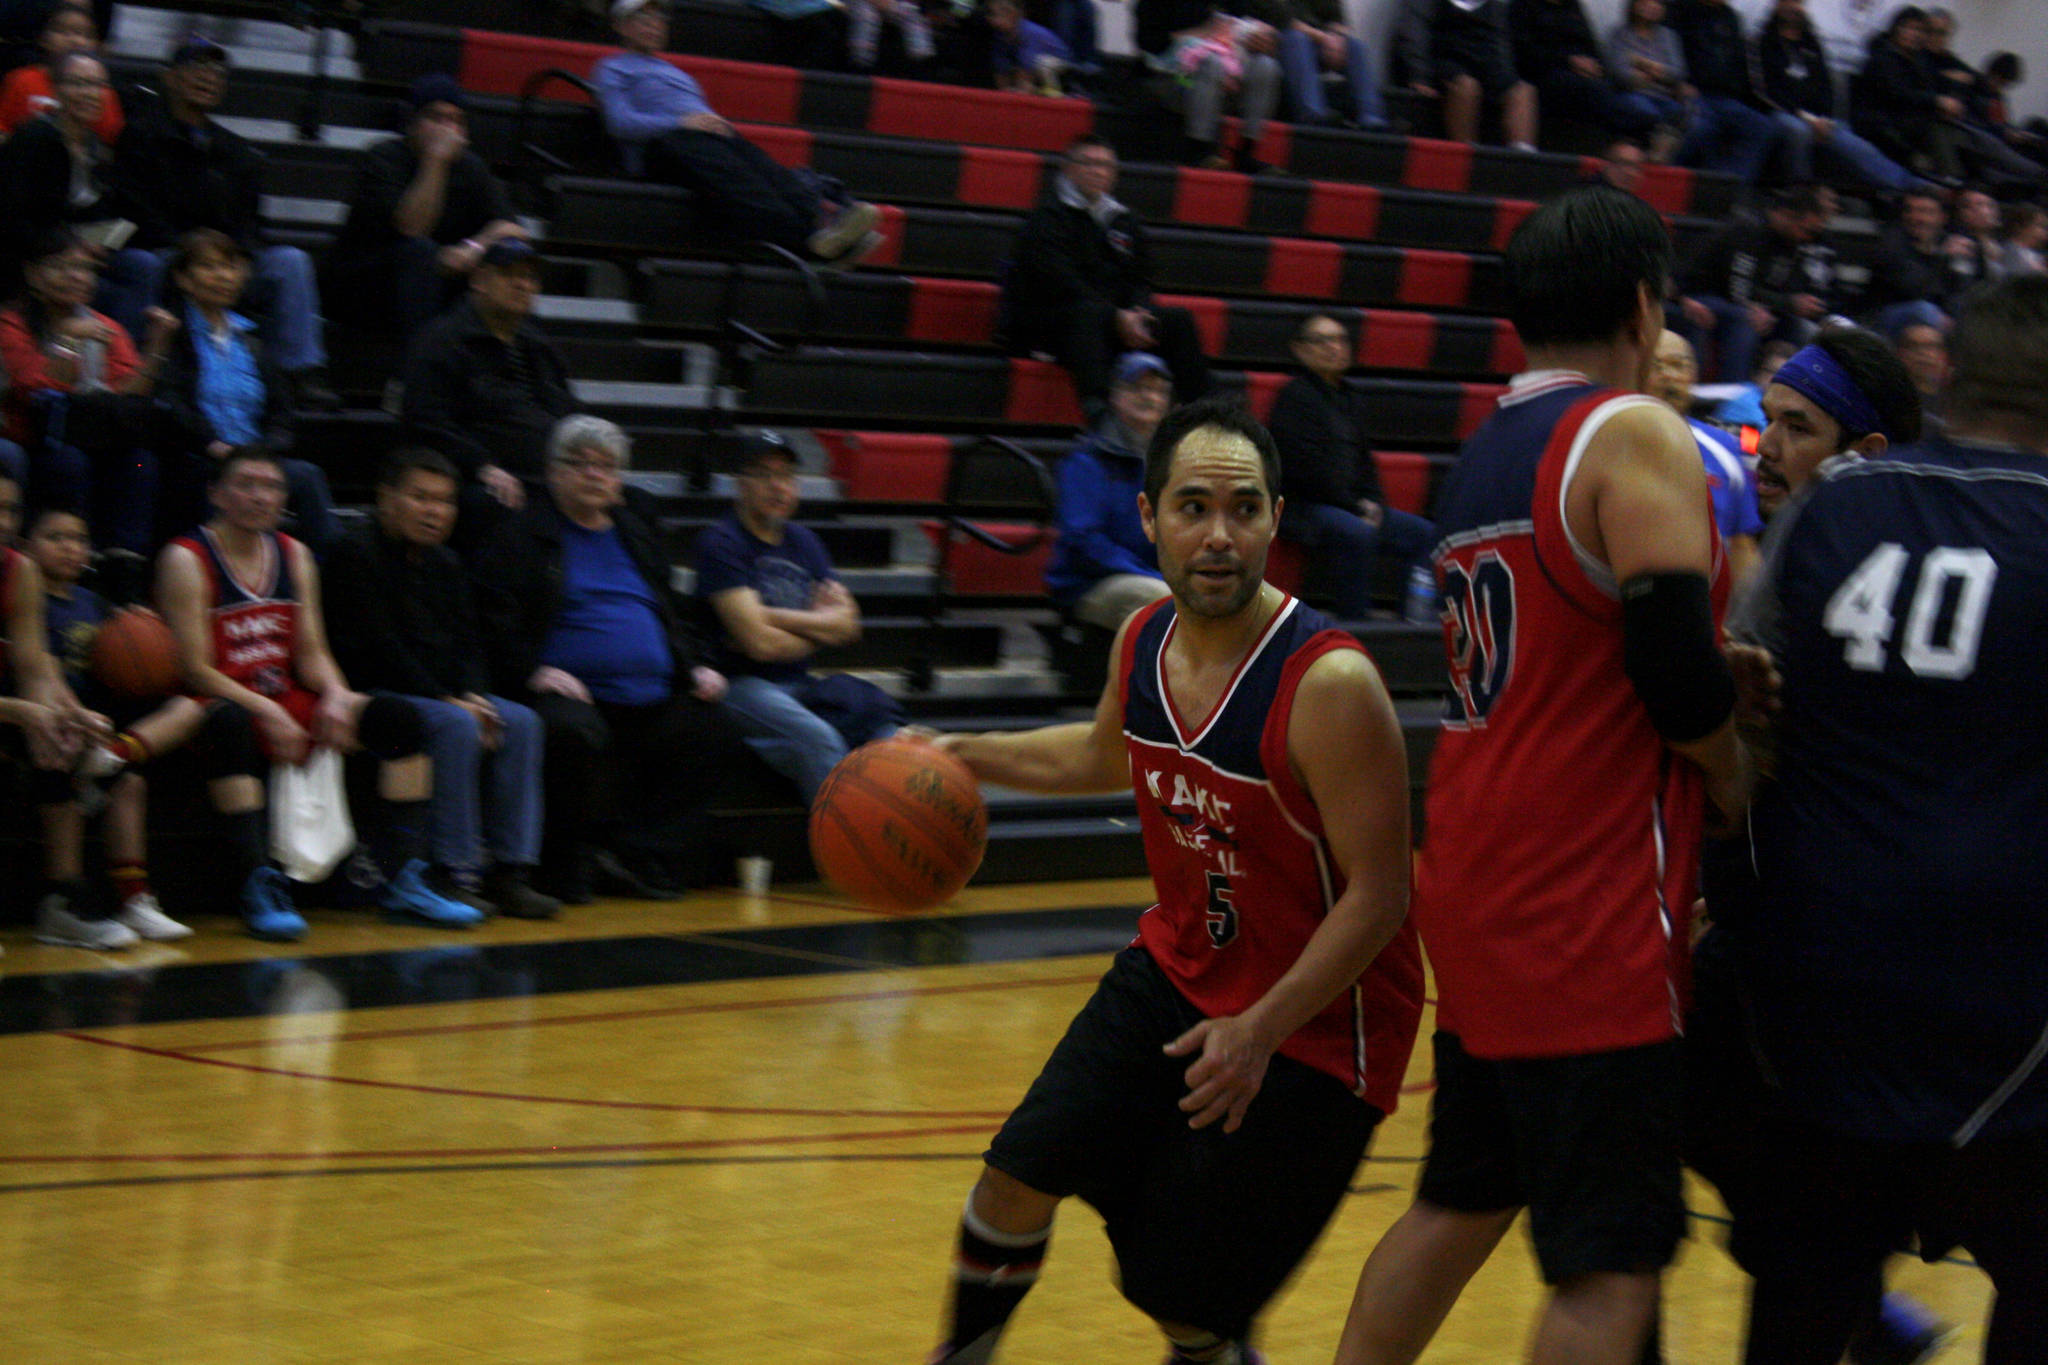 Rudy Bean often filled the lead guard role for Kake, who won big against Kake in the first Gold Medal Tournament game Monday morning. (Ben Hohenstatt | Juneau Empire)